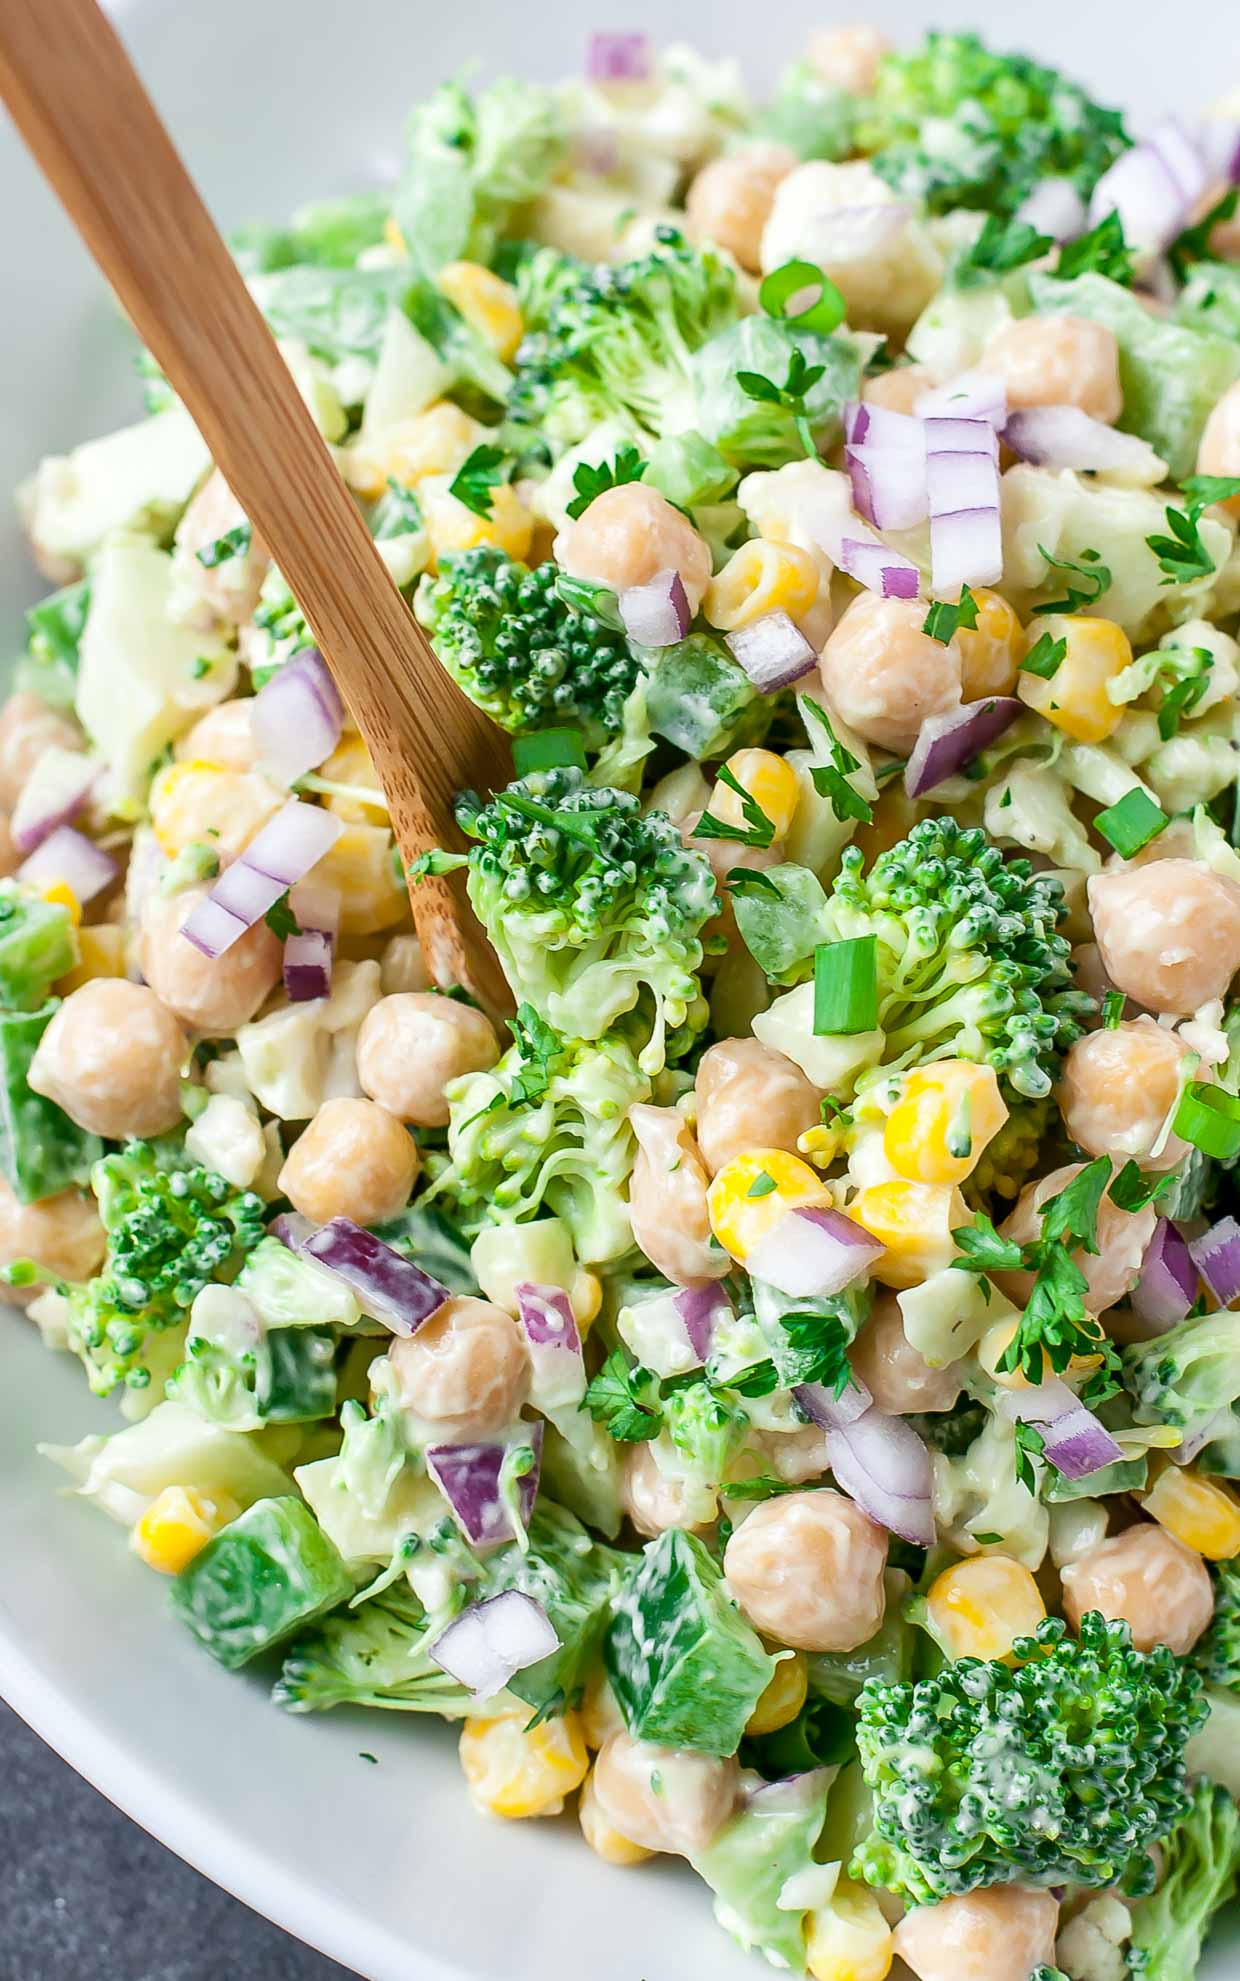 Featuring a tasty medley of broccoli, cauliflower, corn, and chickpeas, this chopped cauliflower broccoli salad with creamy avocado dressing is ready to rock your portable lunch game. Perfect for parties, potlucks, picnics, and a tasty on-the-go lunch!